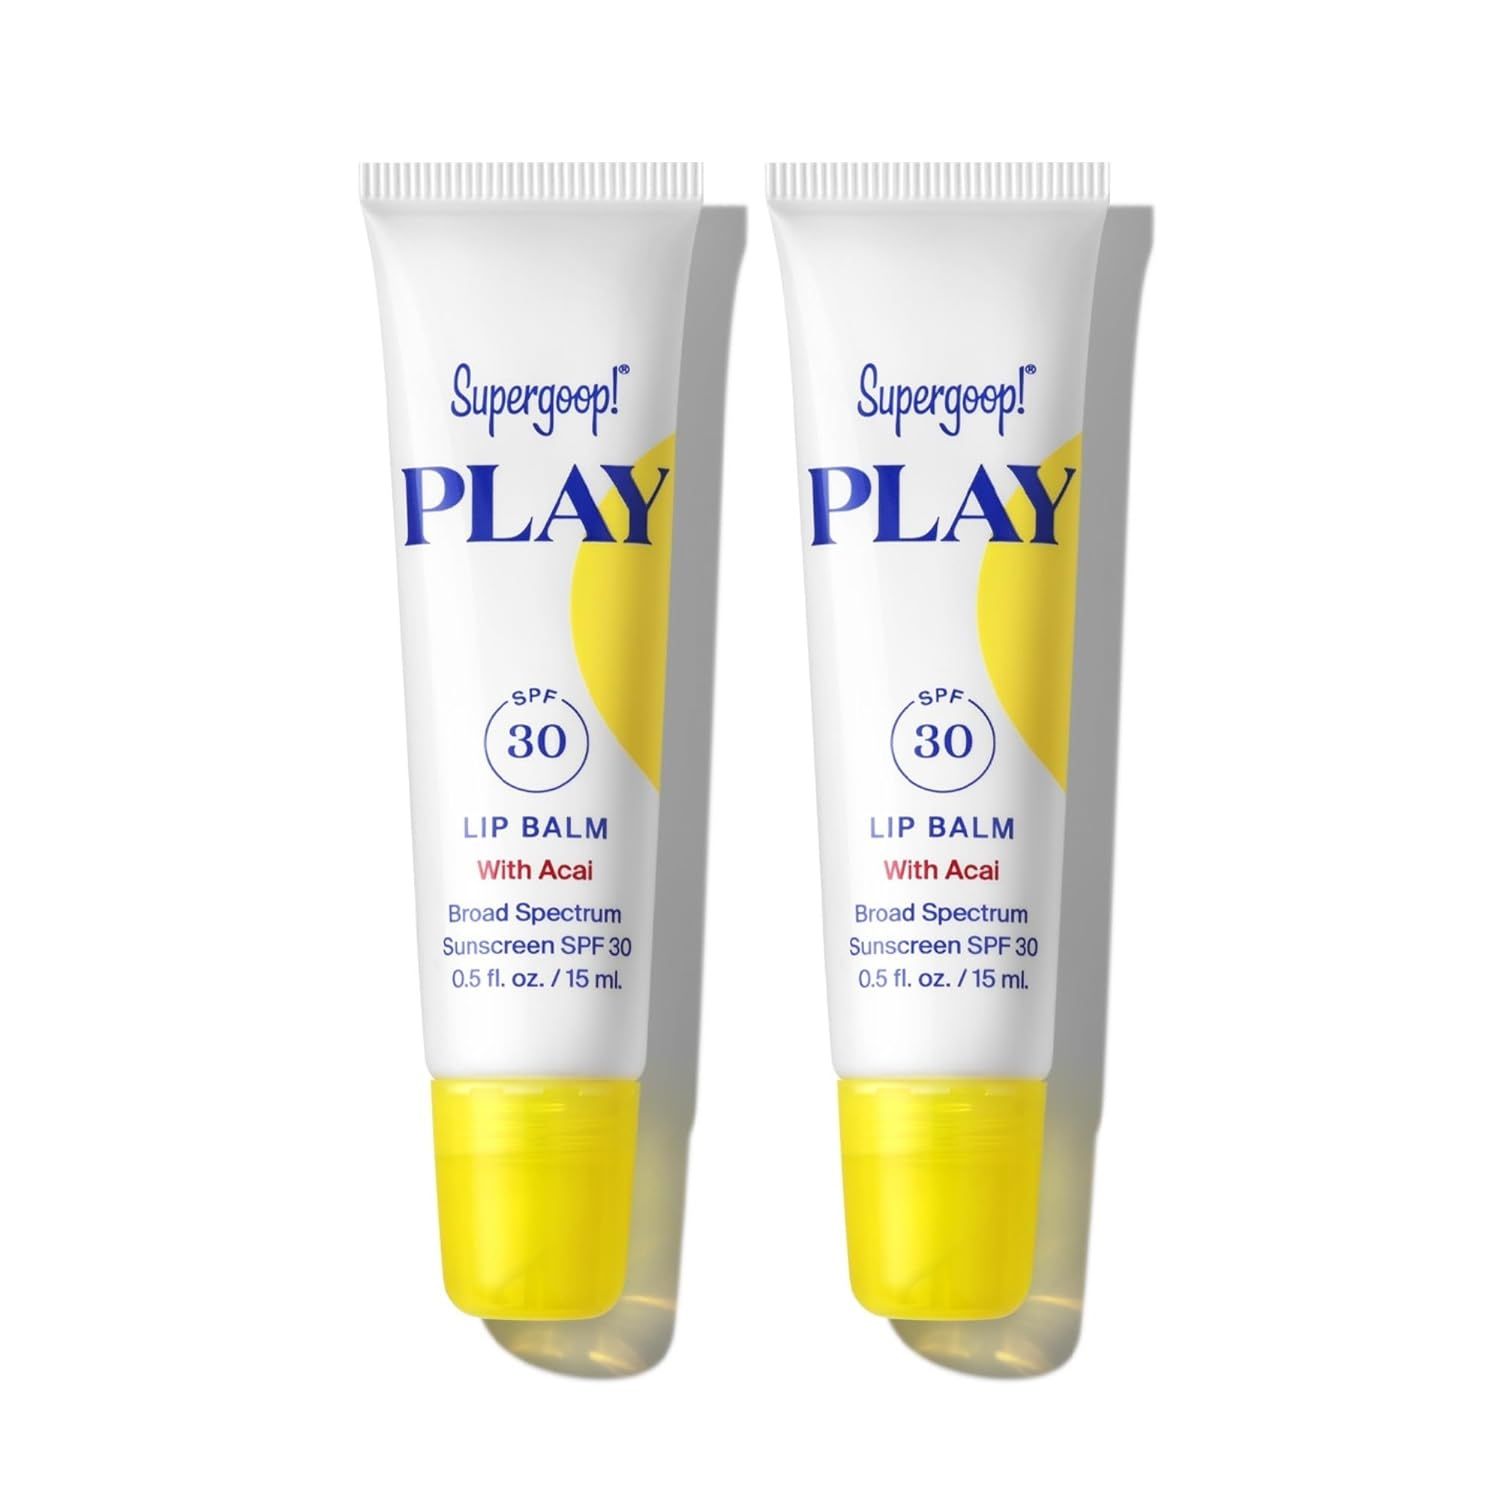 Supergoop! PLAY Lip Balm with Acai - 0.5 fl oz, Pack of 2 - SPF 30 PA+++ Broad Spectrum Sunscreen... | Amazon (US)